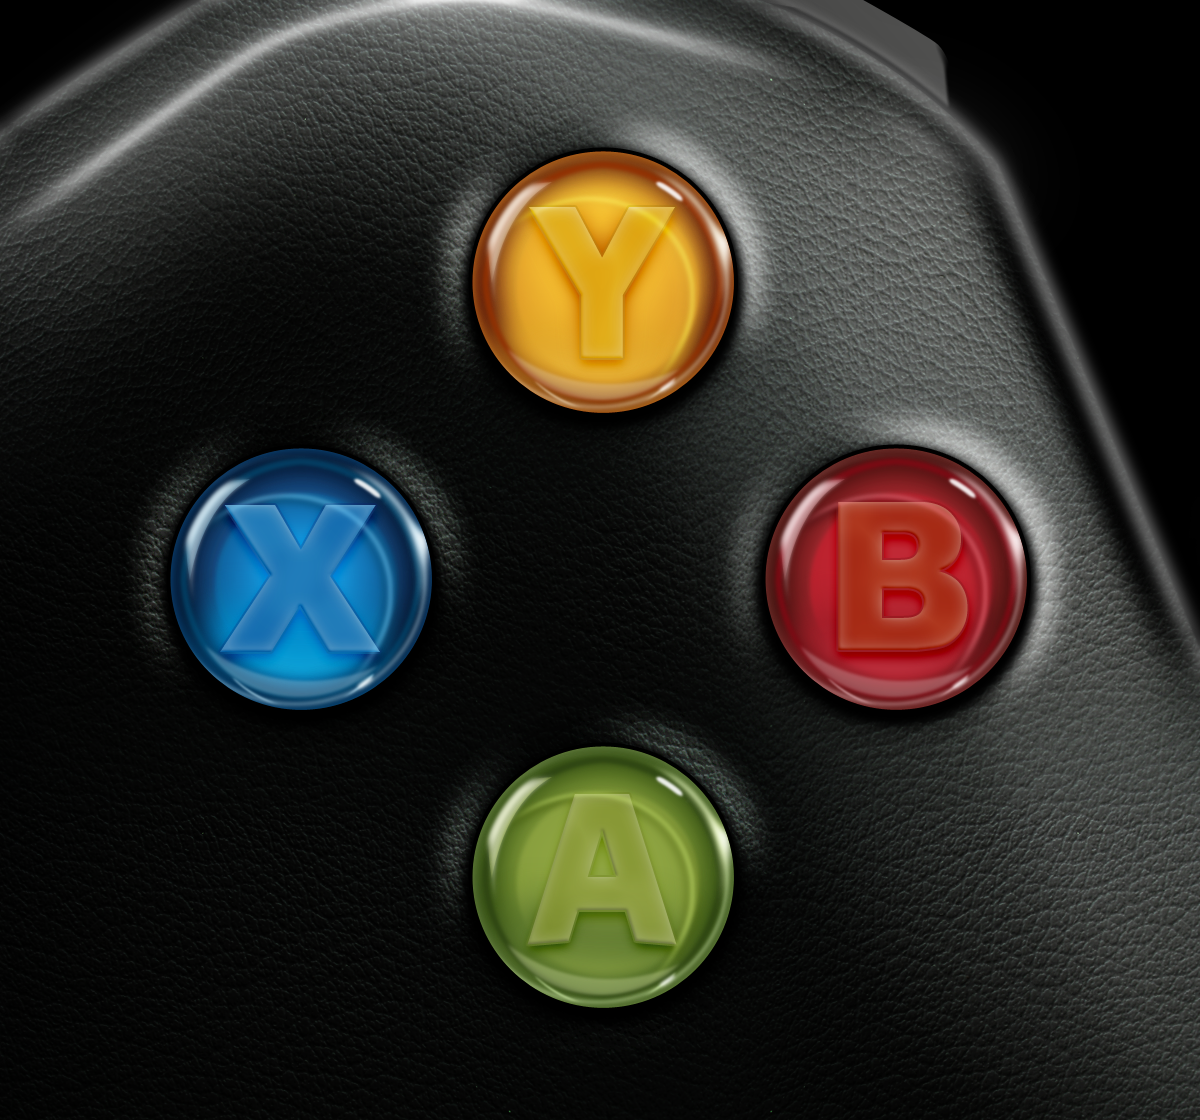 Controller buttons. Xbox 360 Controller buttons. Xbox 360 buttons.